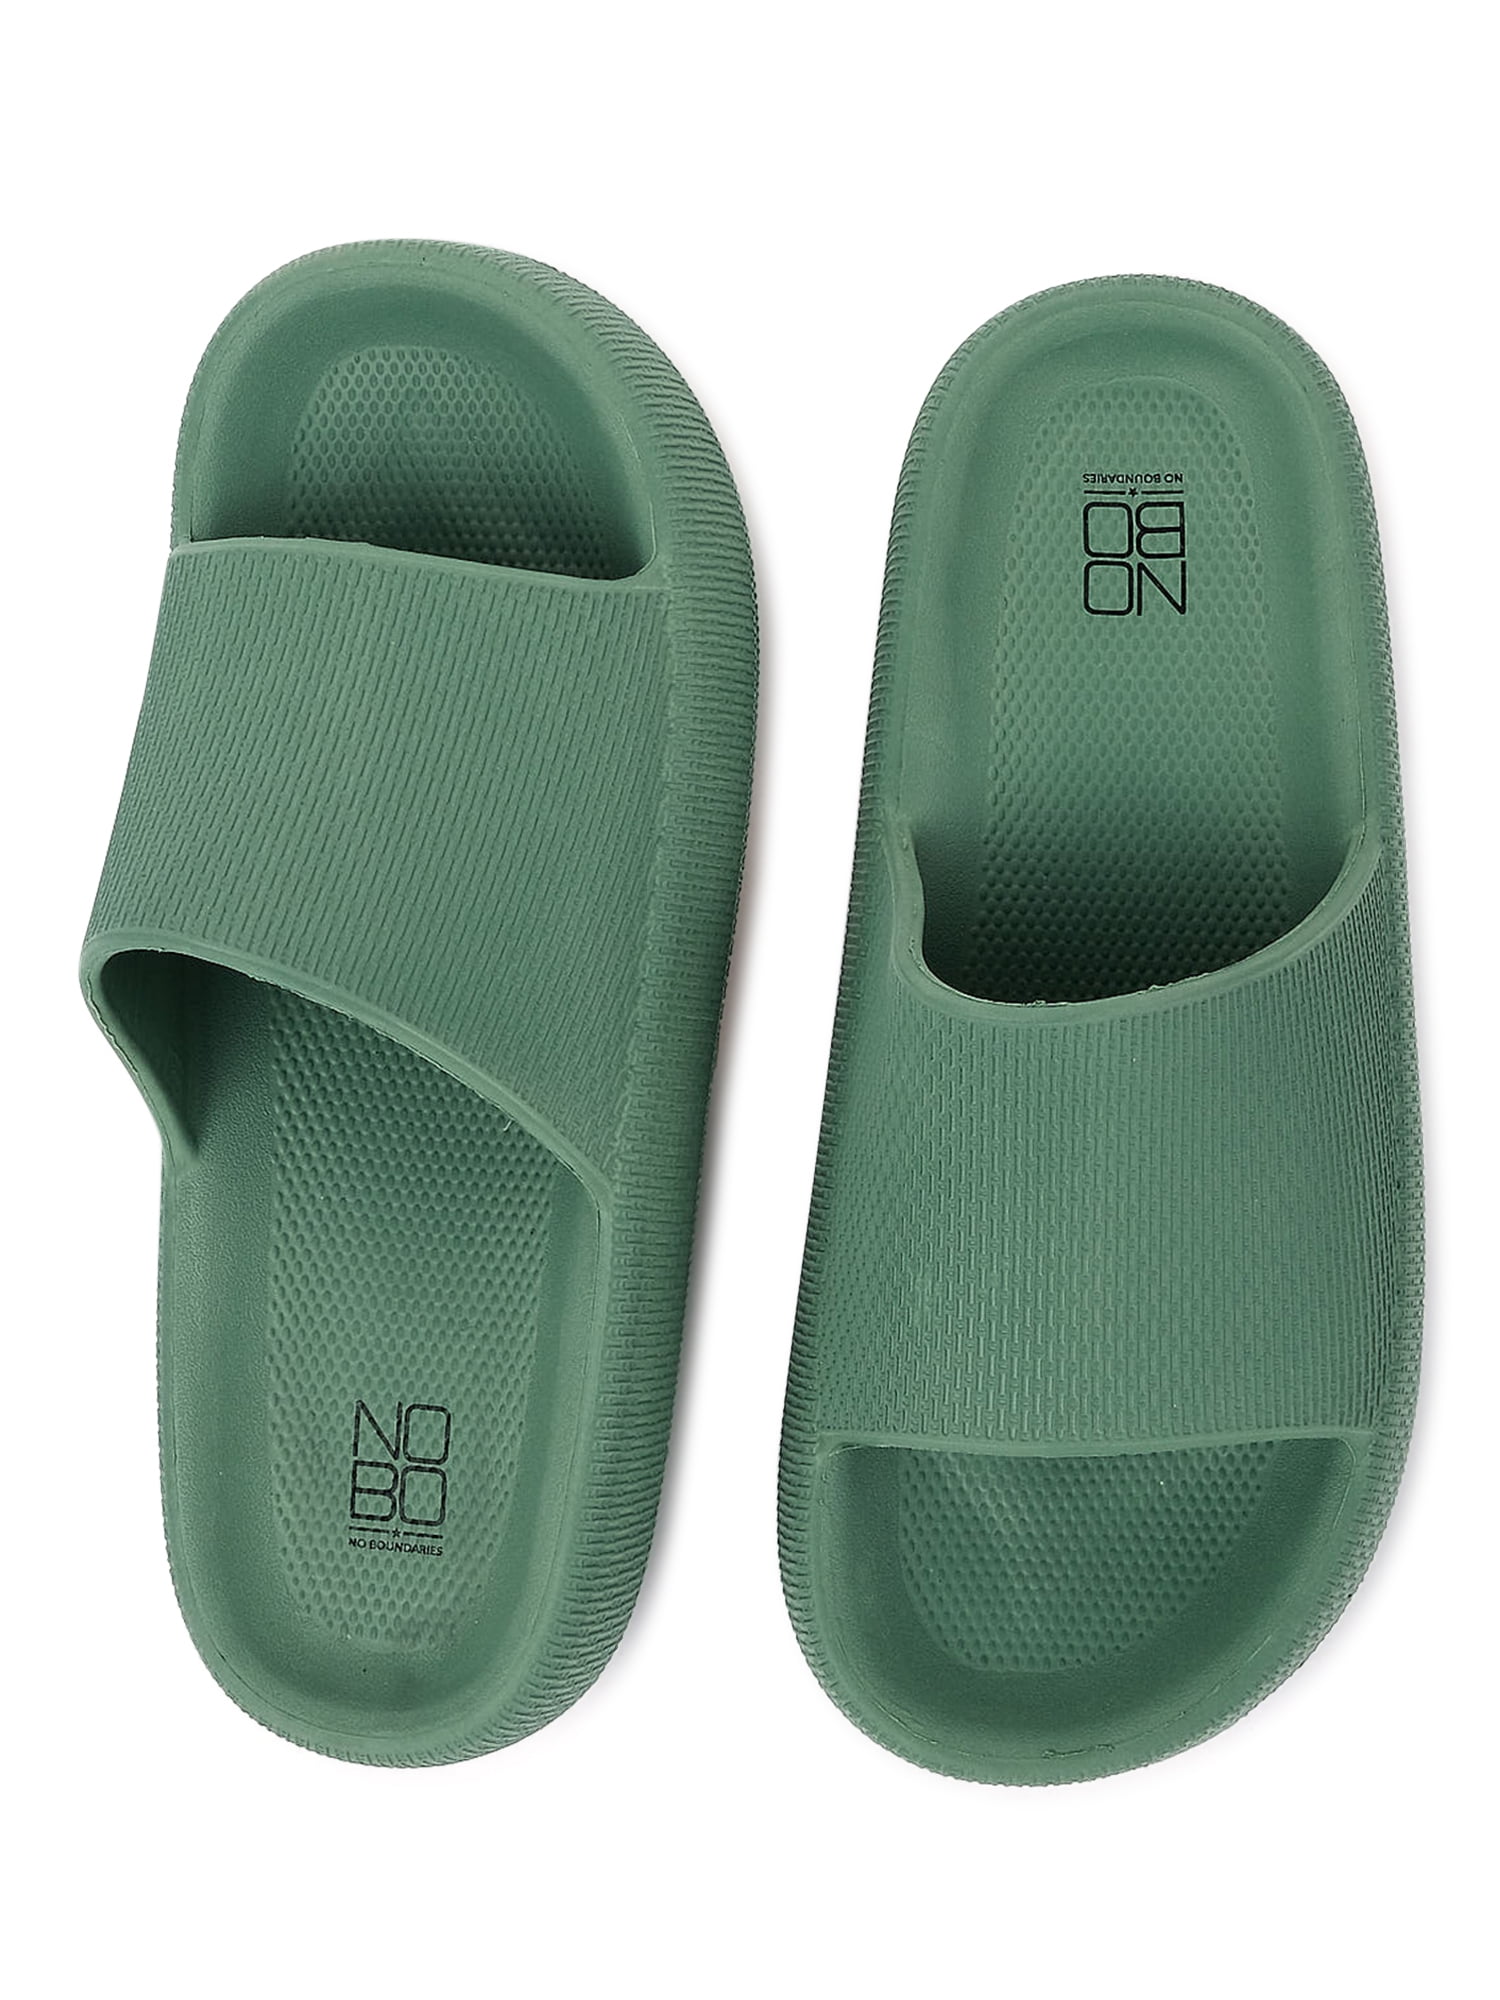 These Slide Sandals Help Relieve Pain, Say Amazon Shoppers